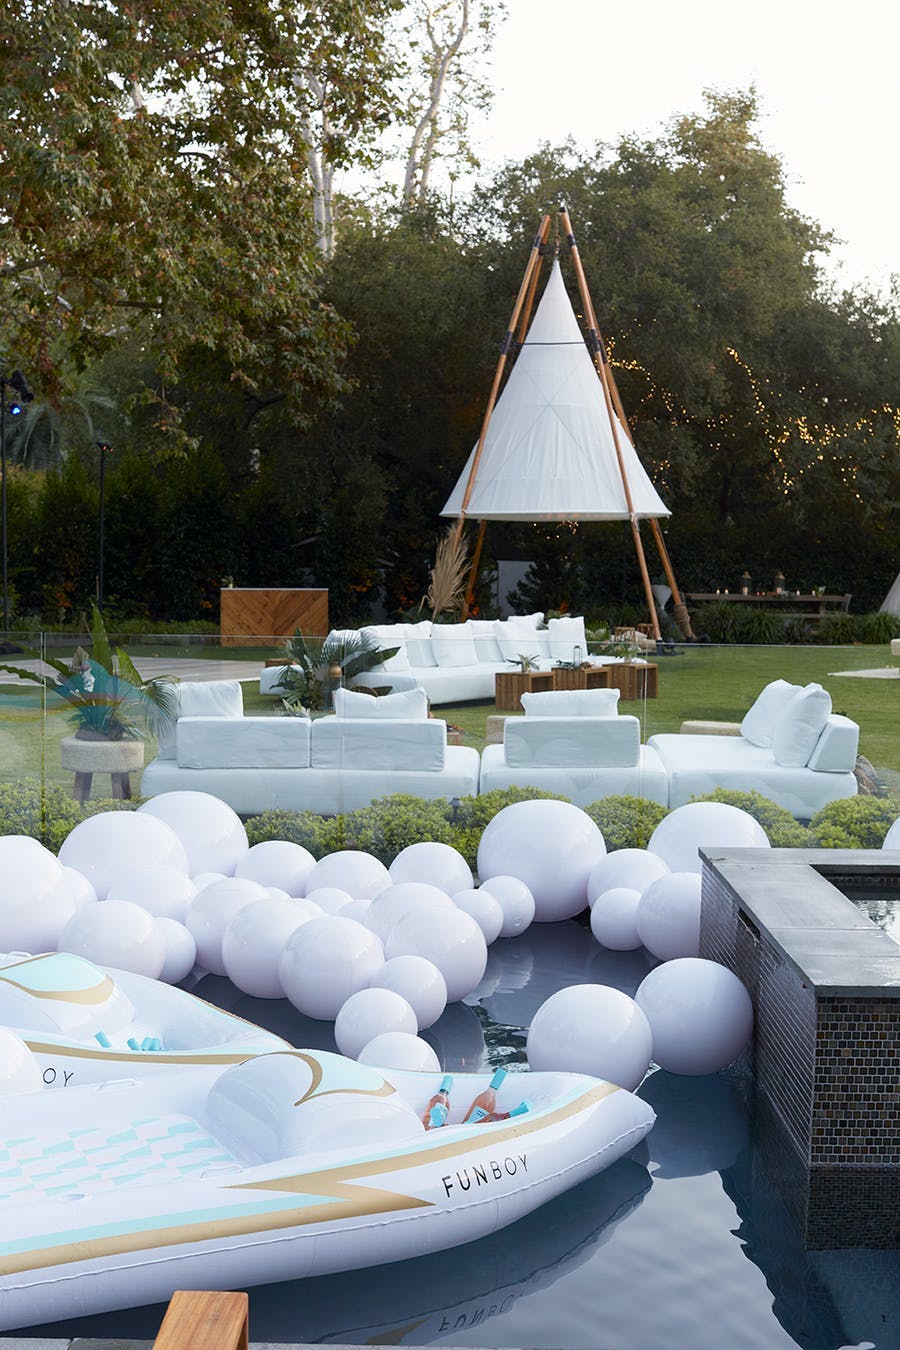 a pool with white balloons floating on top. In the background is a white tent with couches